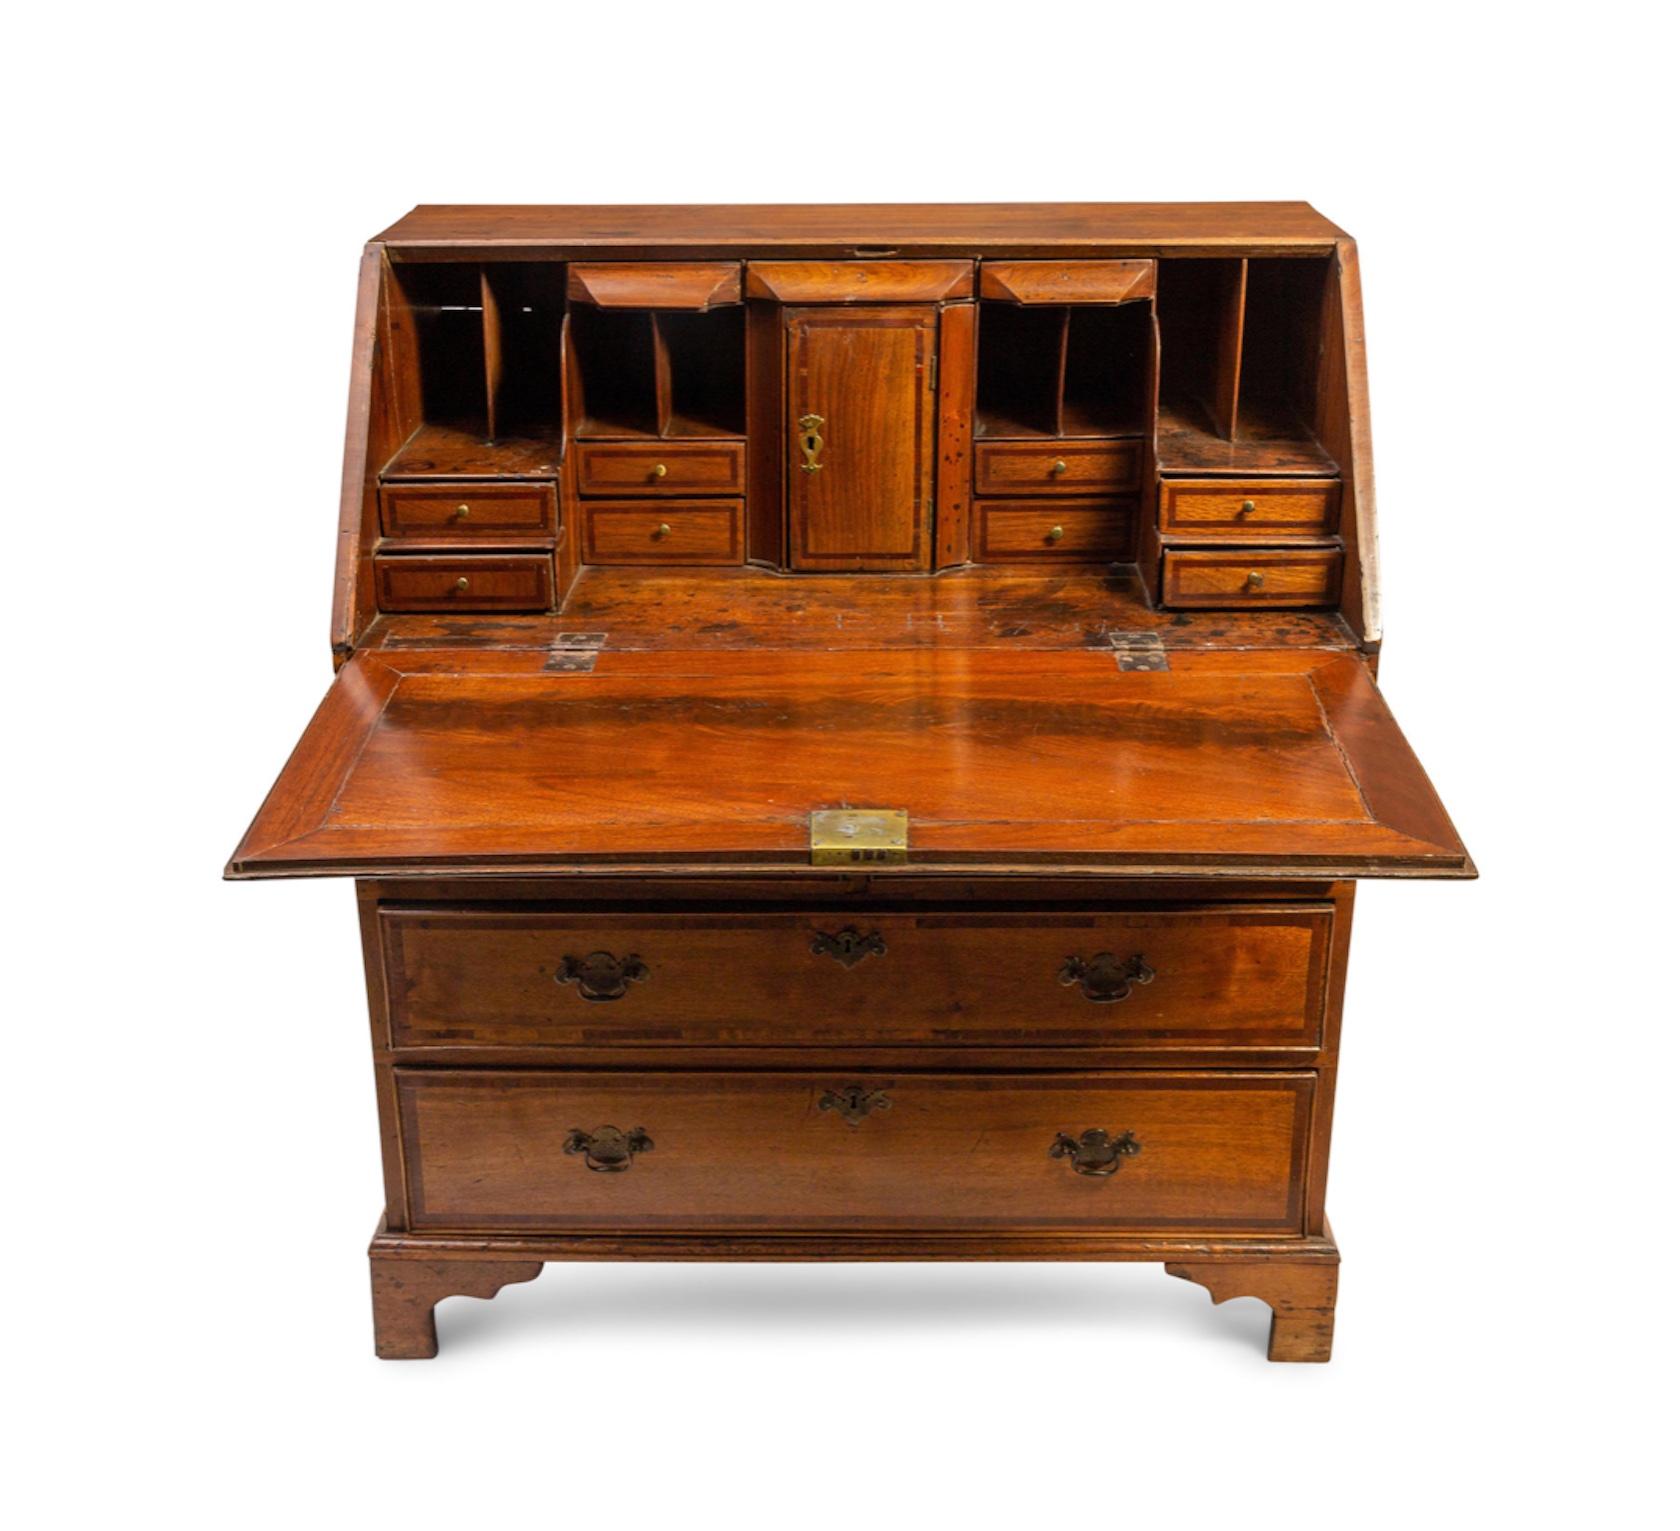 Mahogany An American Slant Front Desk 19th Century Height 44 x width 37 x depth 21 inches For Sale